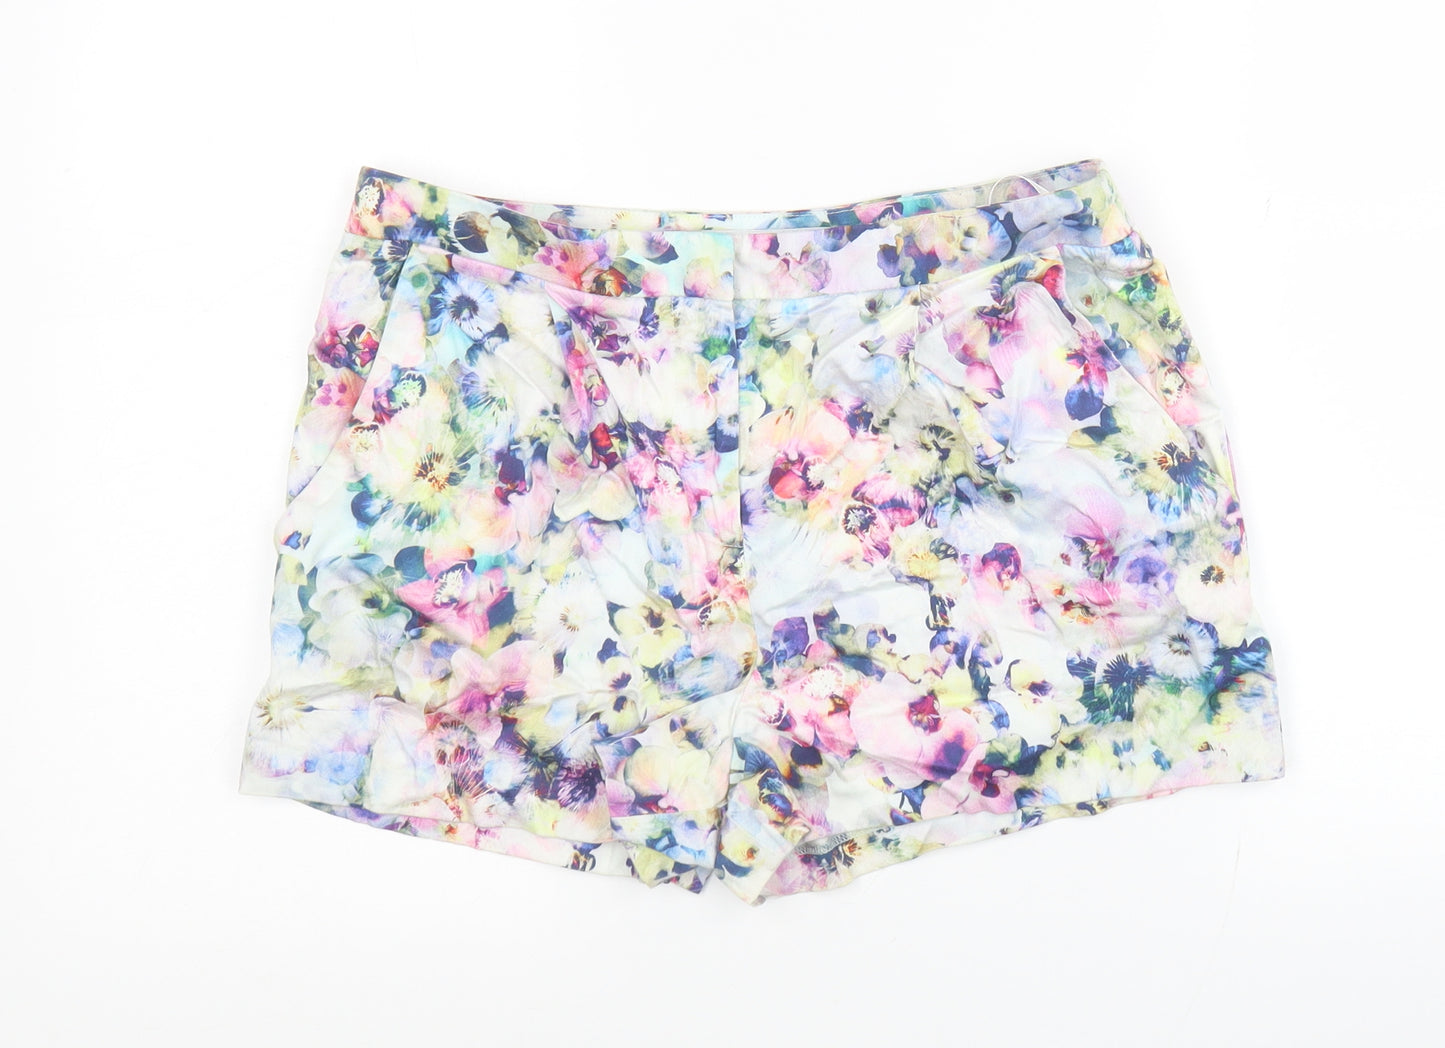 Forever New Womens Multicoloured Floral Cotton Hot Pants Shorts Size 10 L3 in Regular Button